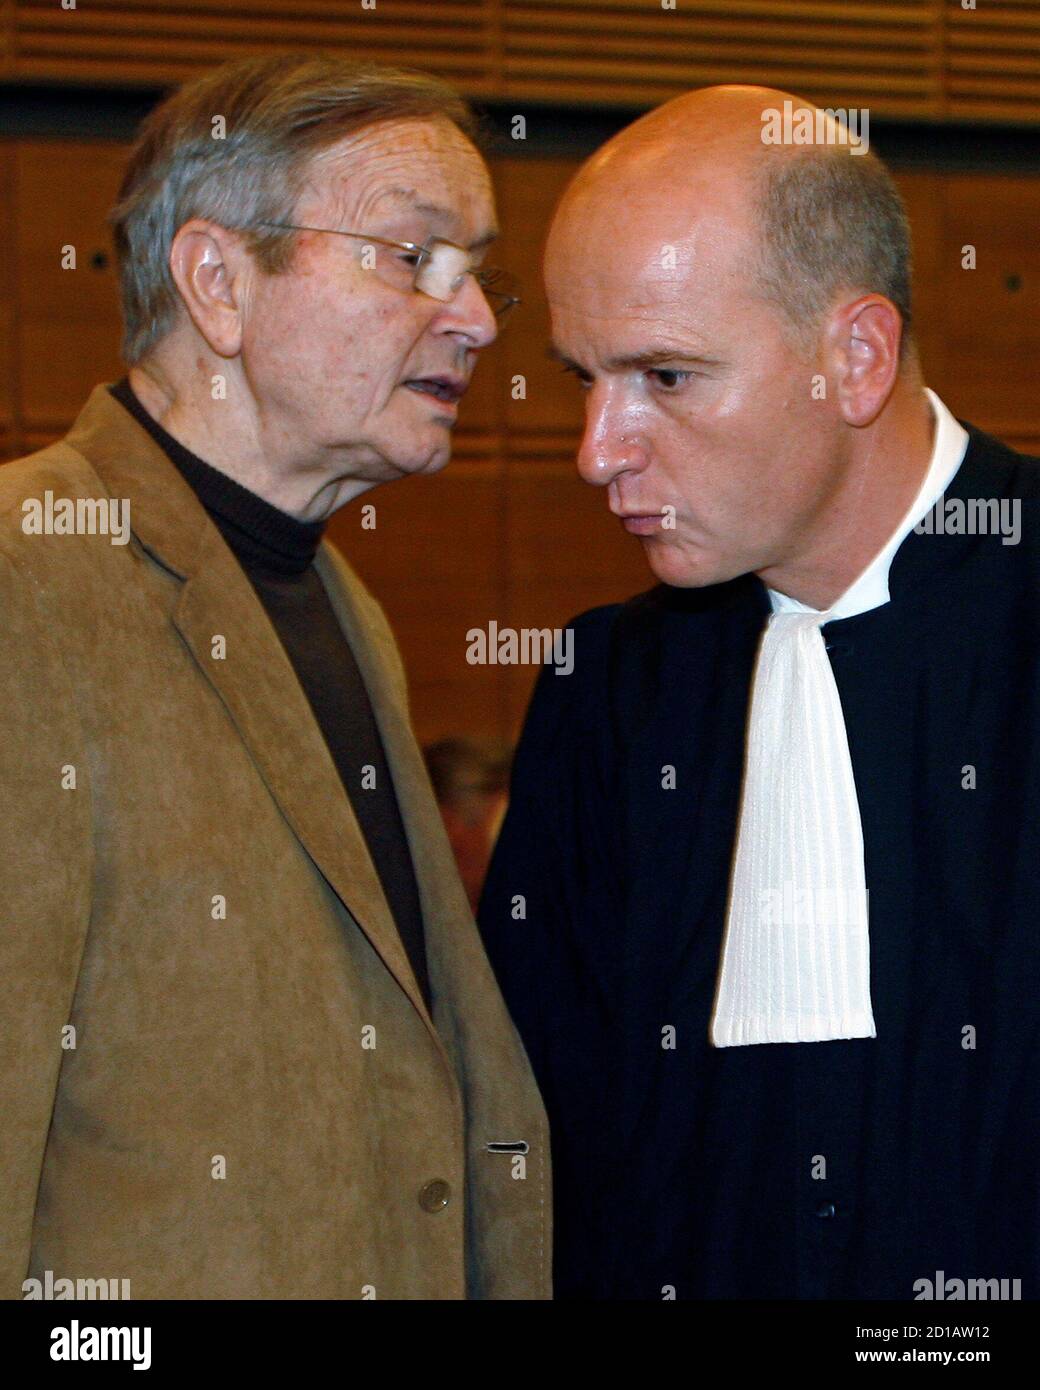 French former lawyer Jean-Maurice Agnelet (L) talks with his lawyer Francois  Saint-Pierre in a courthouse in Aix-en-Provence, south-eastern France at  the start of his trial in the court of appeals regarding the